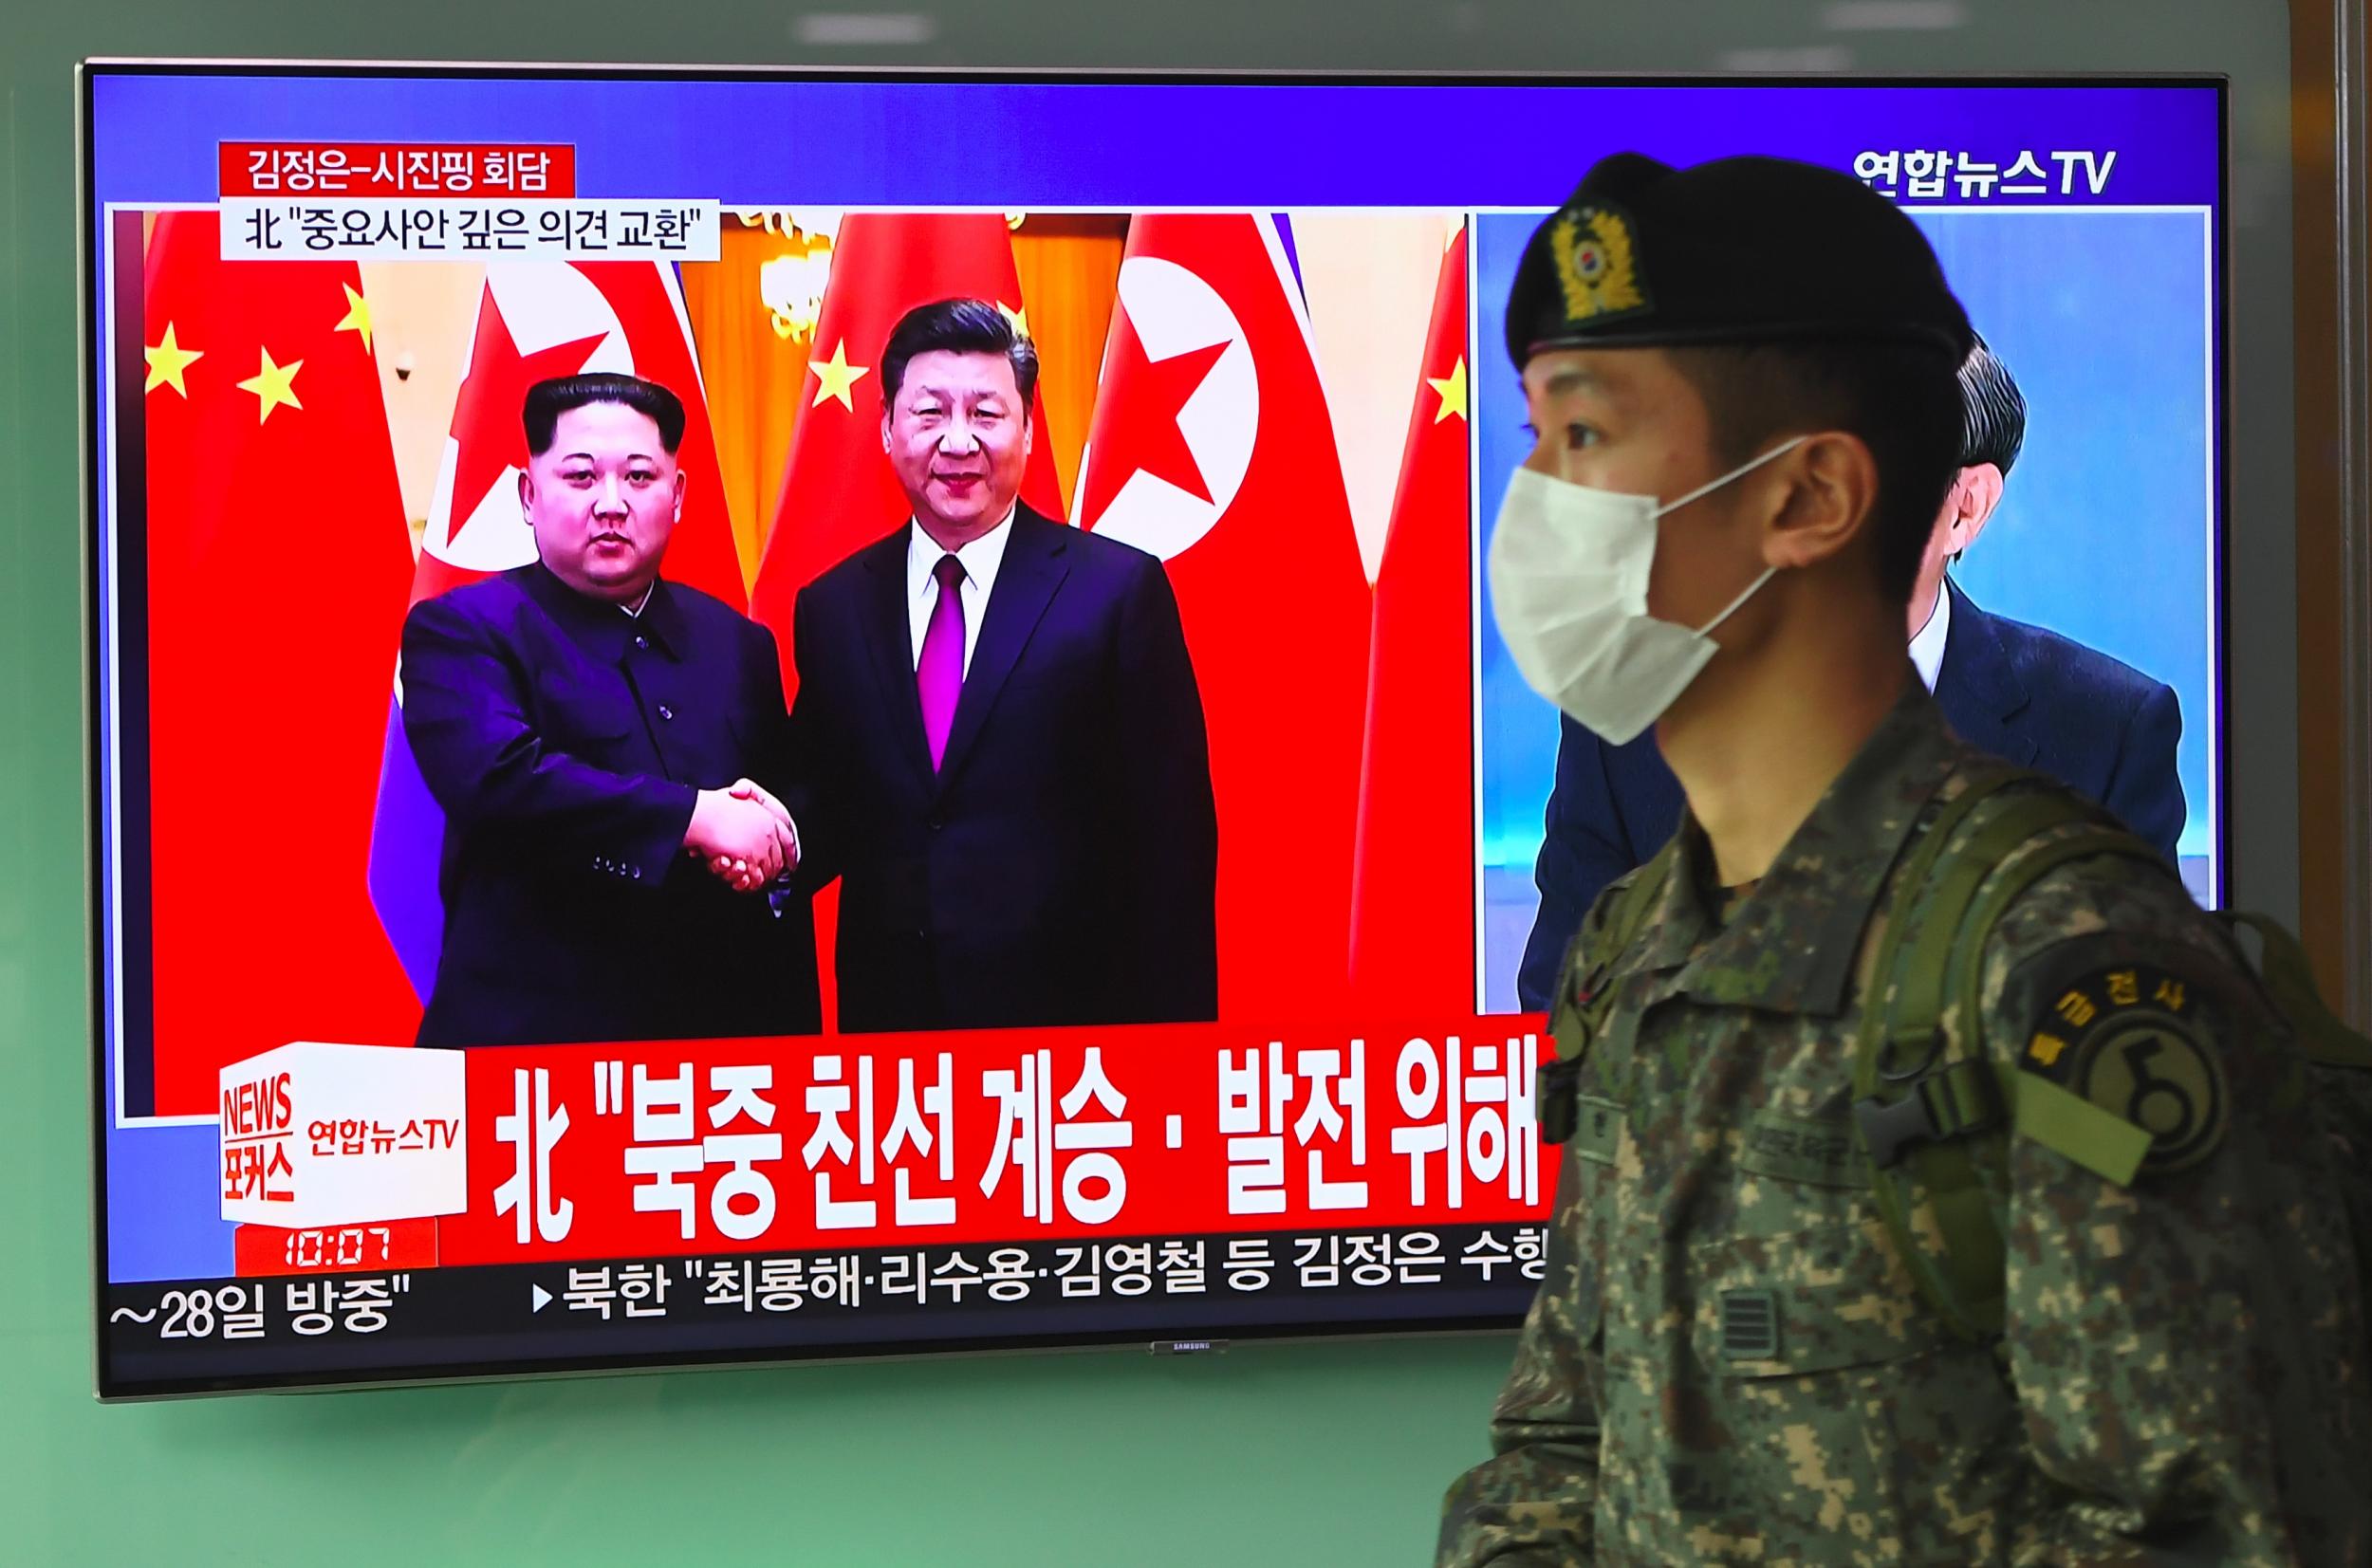 A South Korean soldier walks past a television news screen reporting about a visit to China by North Korean leader Kim Jong Un